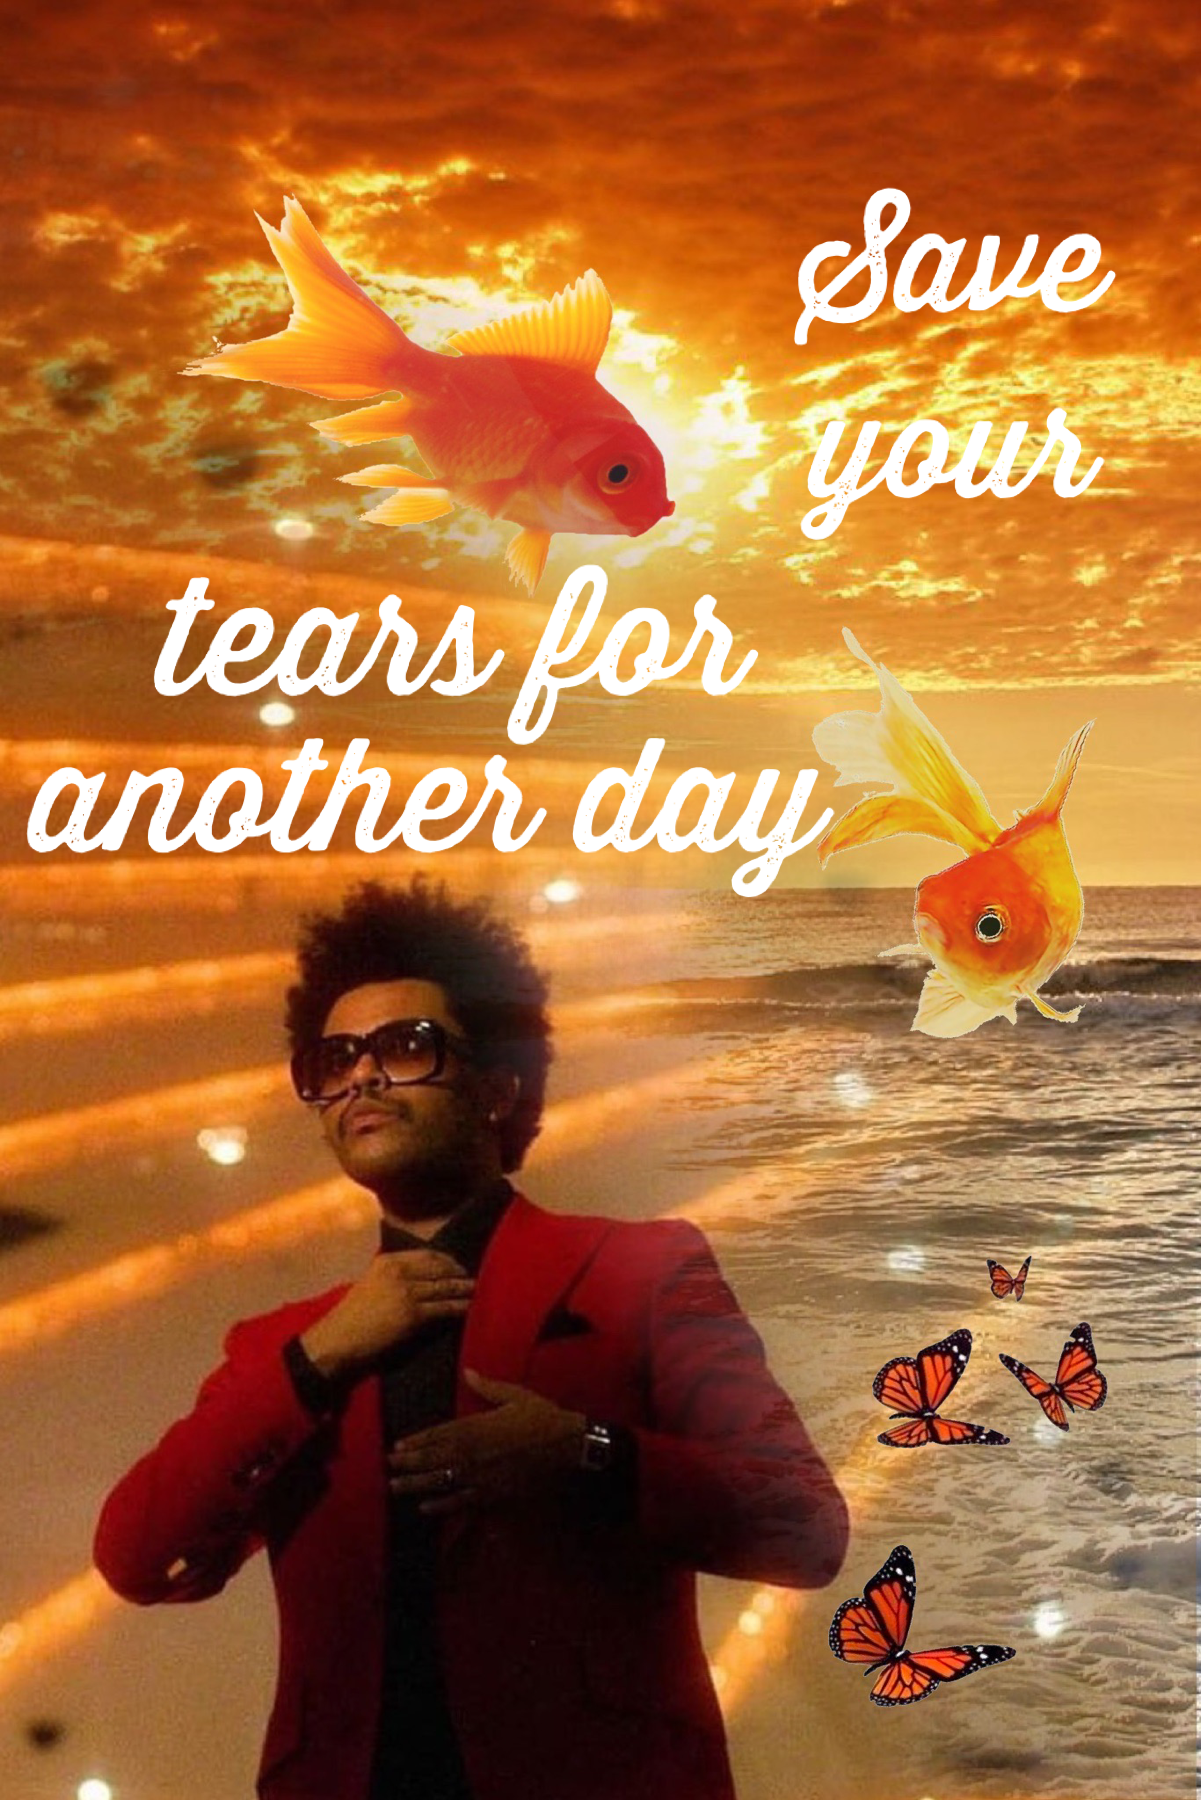 Save Your Tears// The Weeknd
Thanks for the request mintflowers!